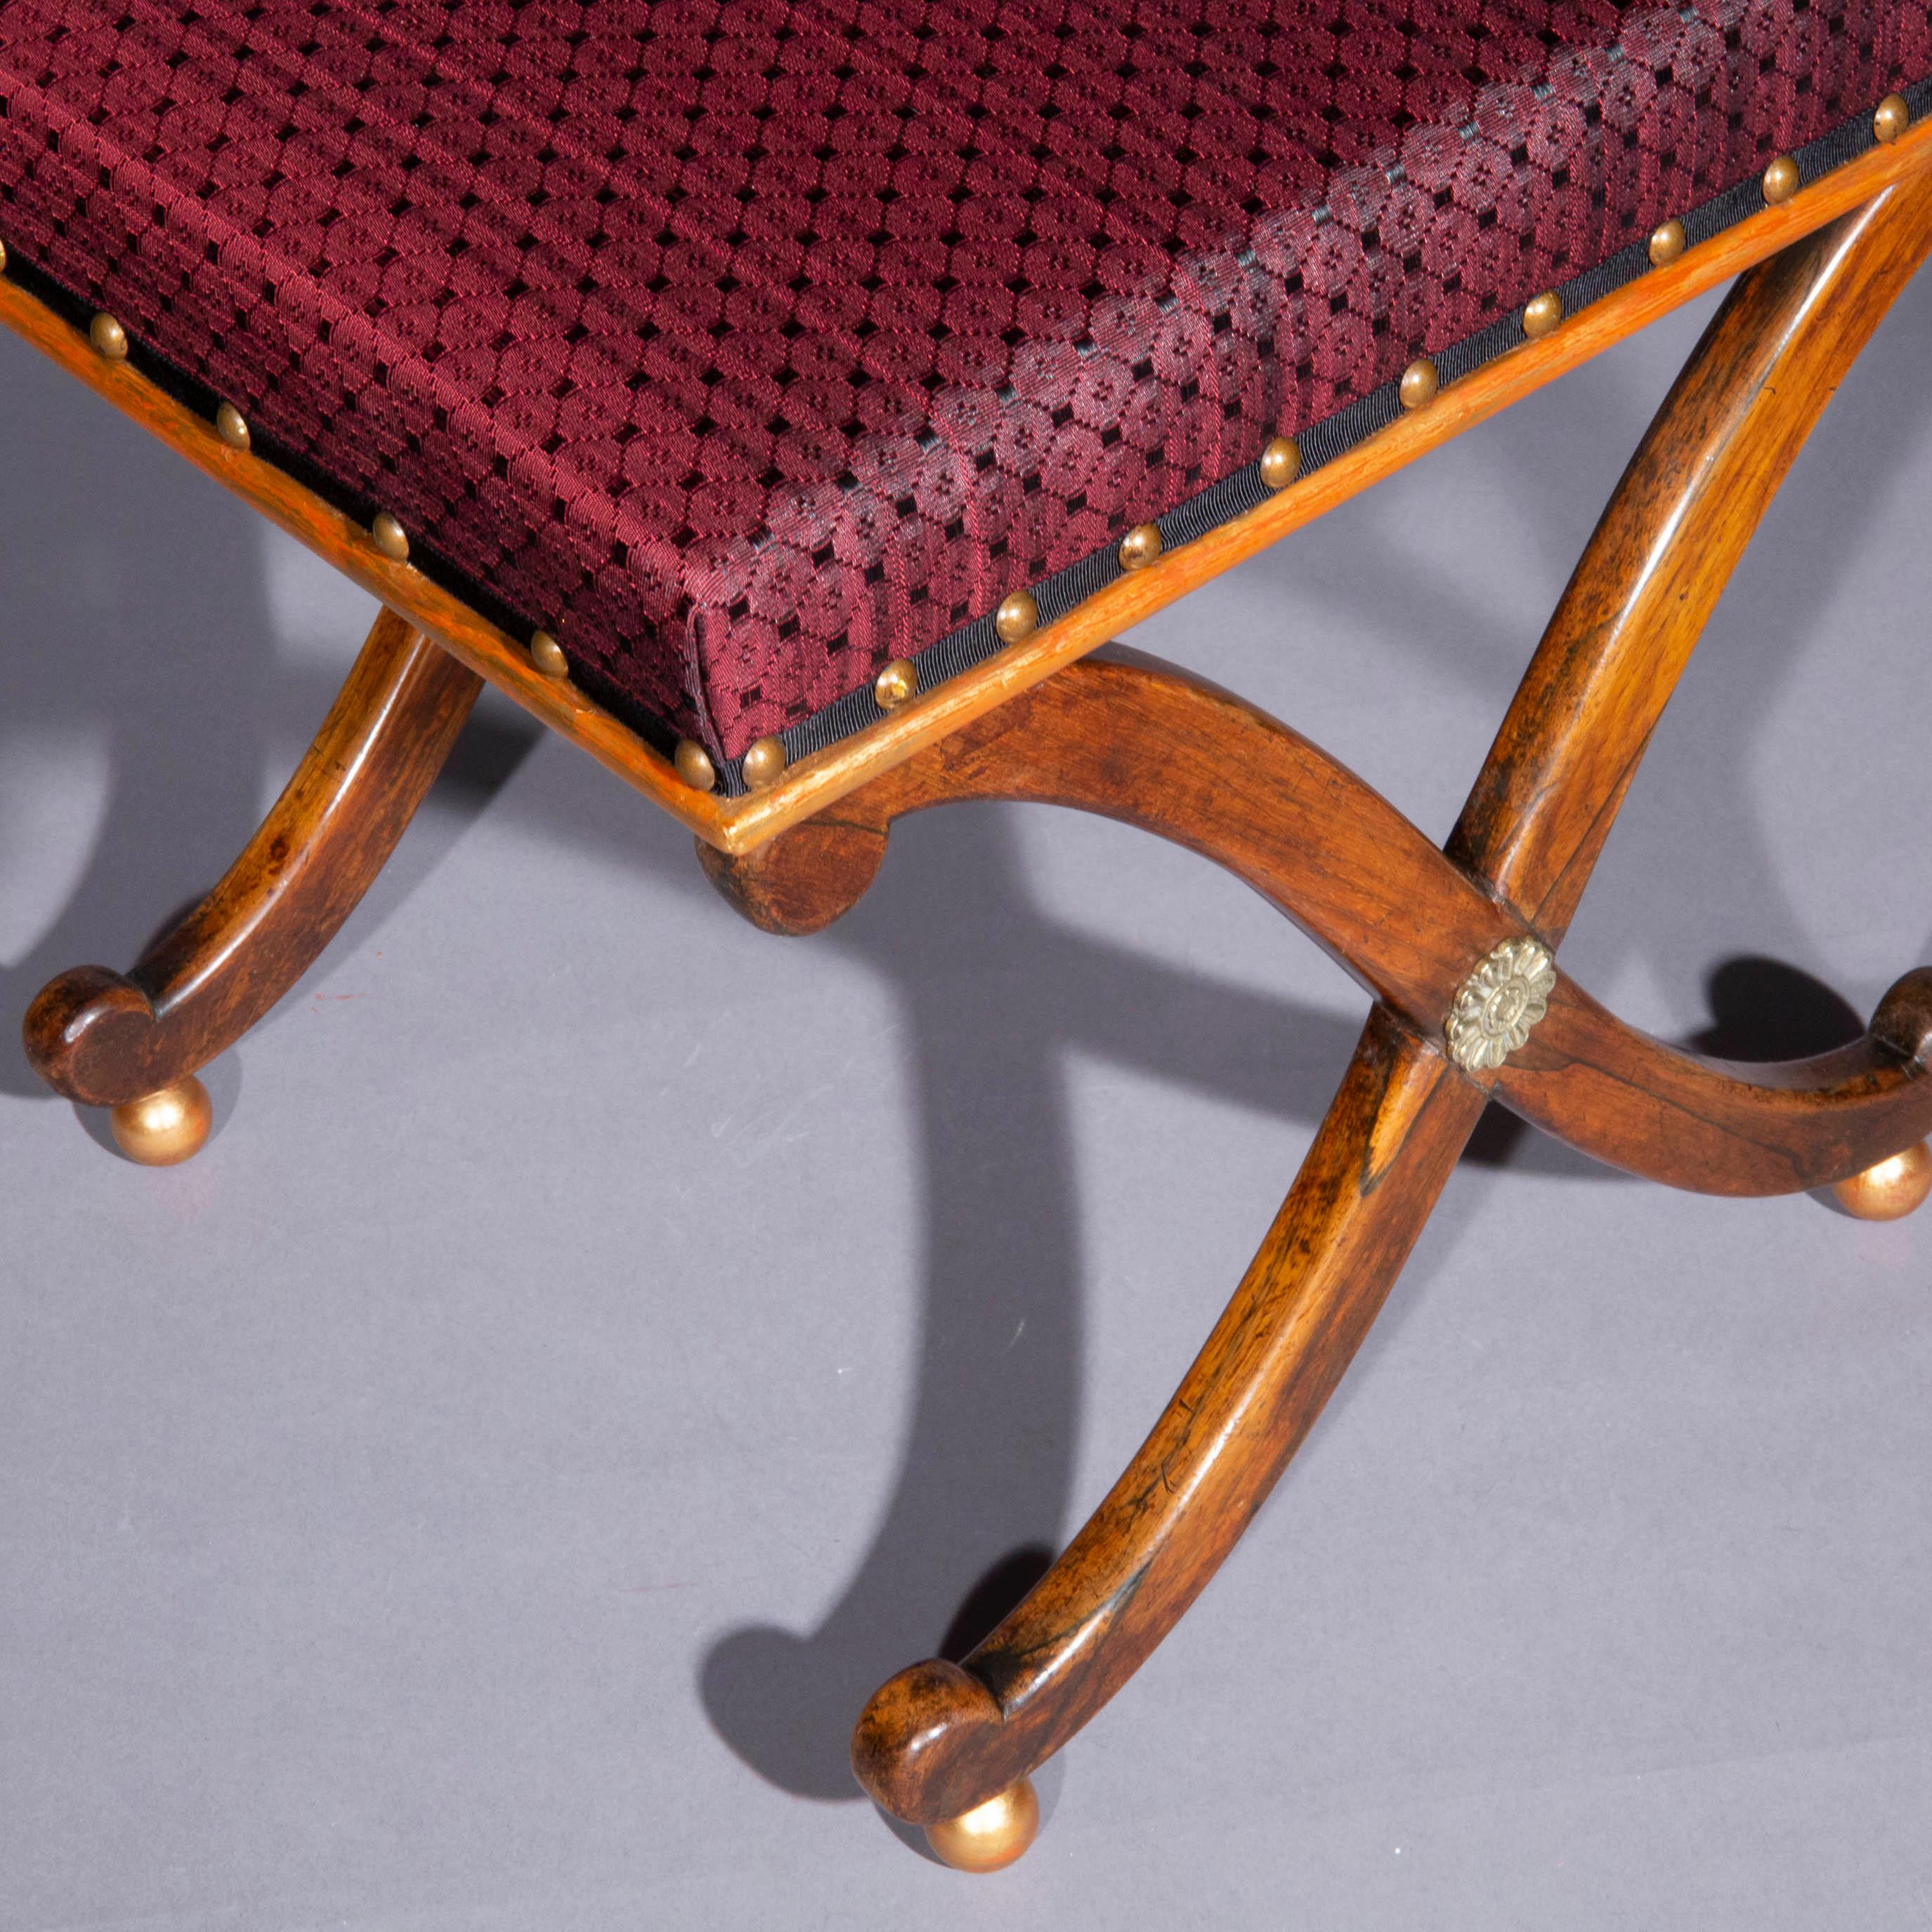 Hand-Crafted Regency Parcel-Gilt X-Frame Stool with Brass Mounts, after Design by Thomas Hope